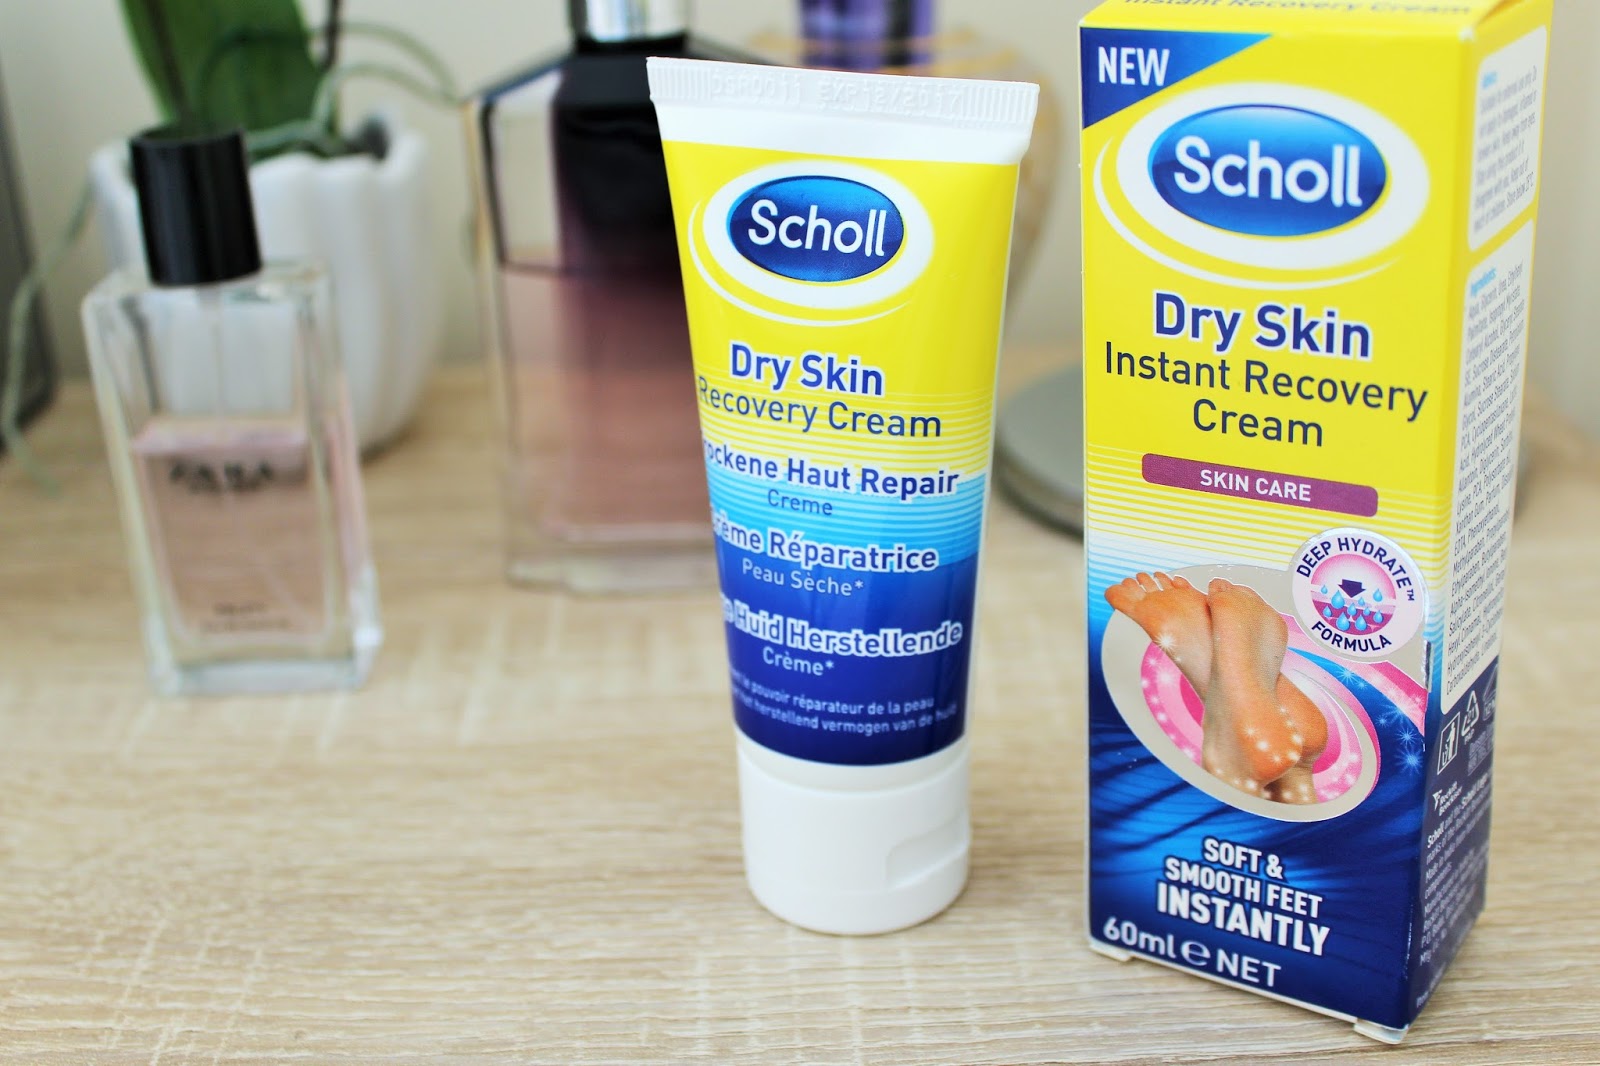 Scholl Dry Skin Instant Recovery Cream